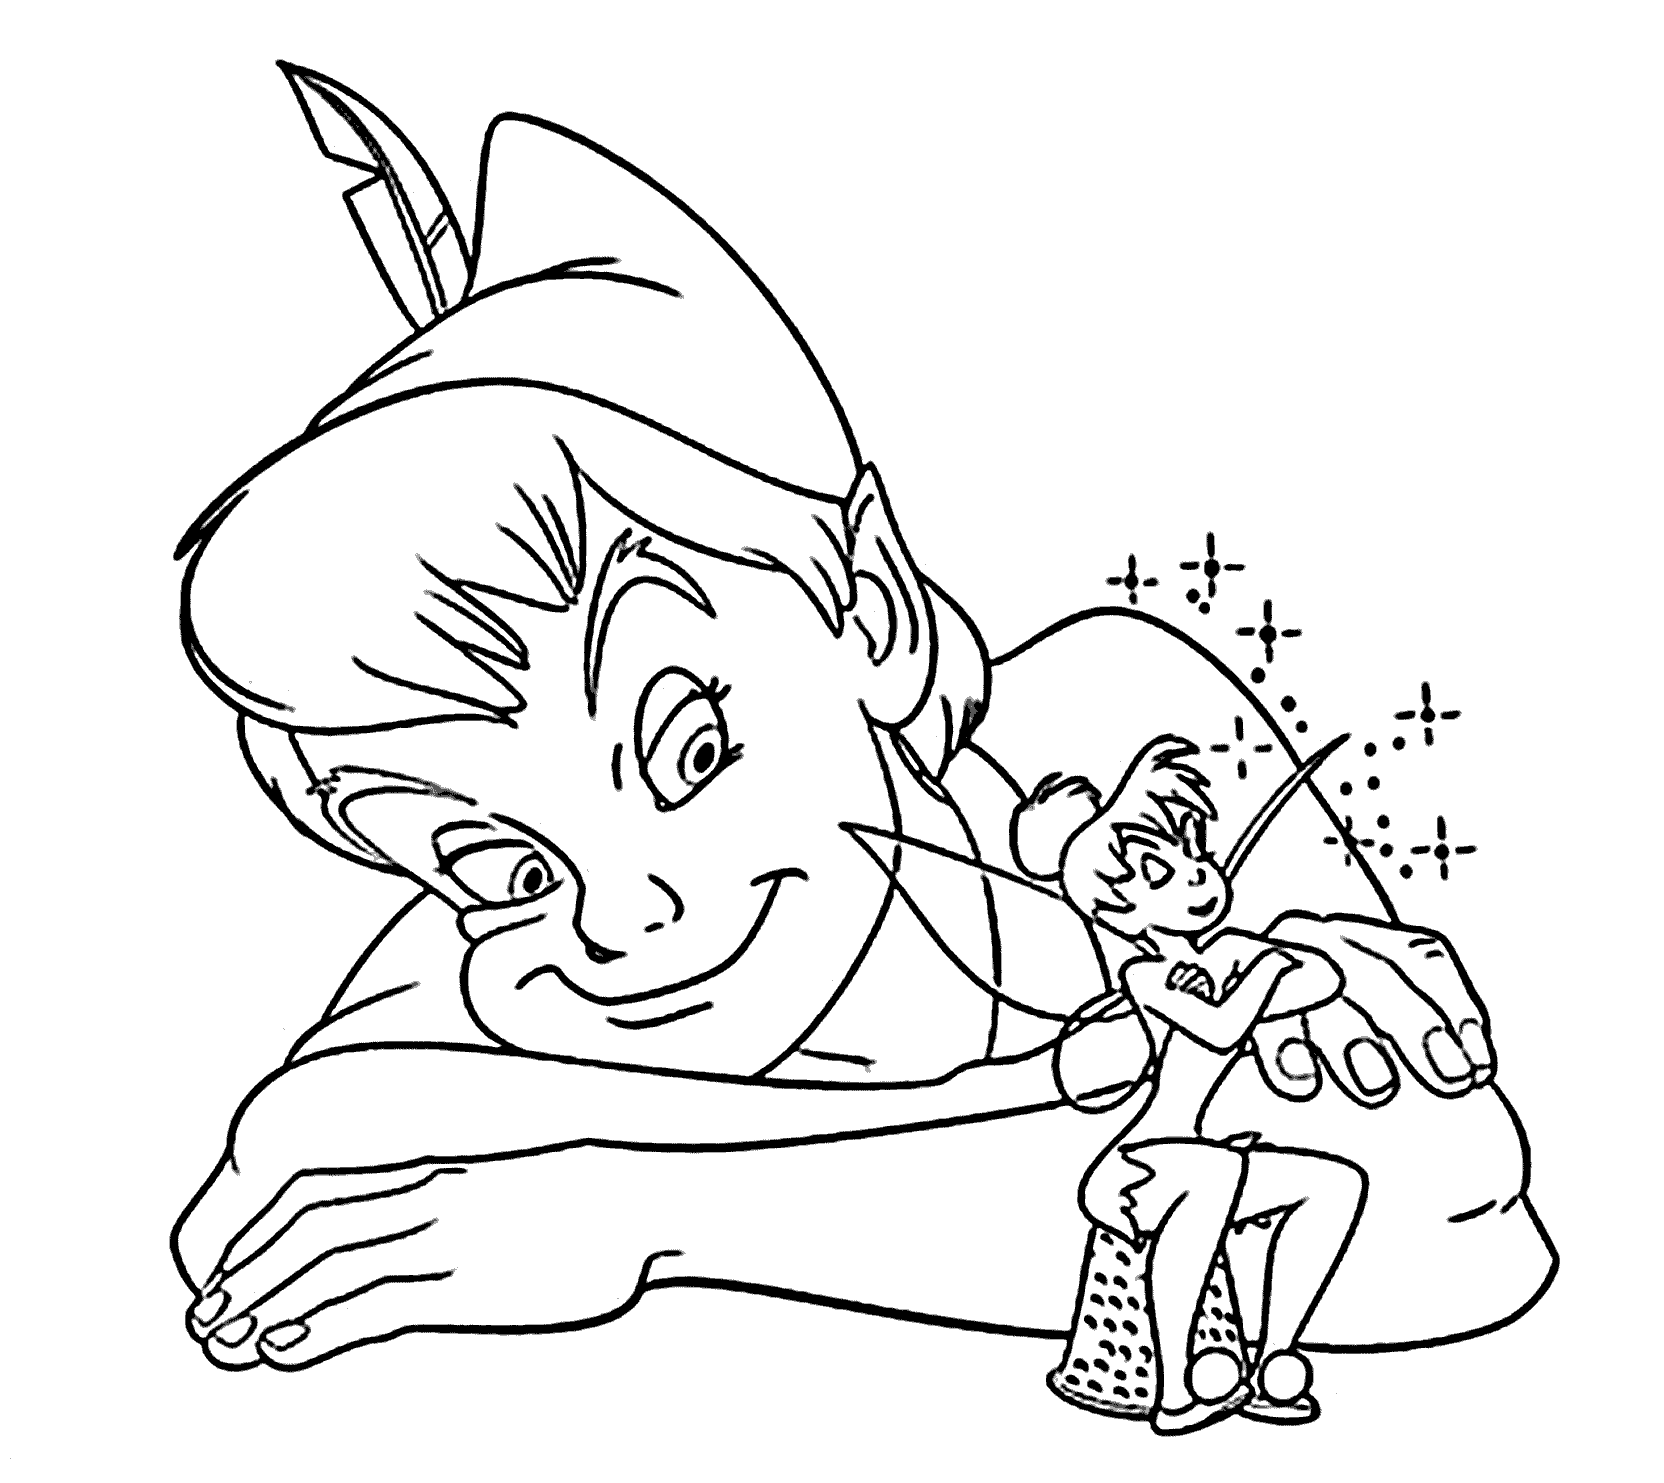 Coloring Pages Peter Pan - Coloring Page